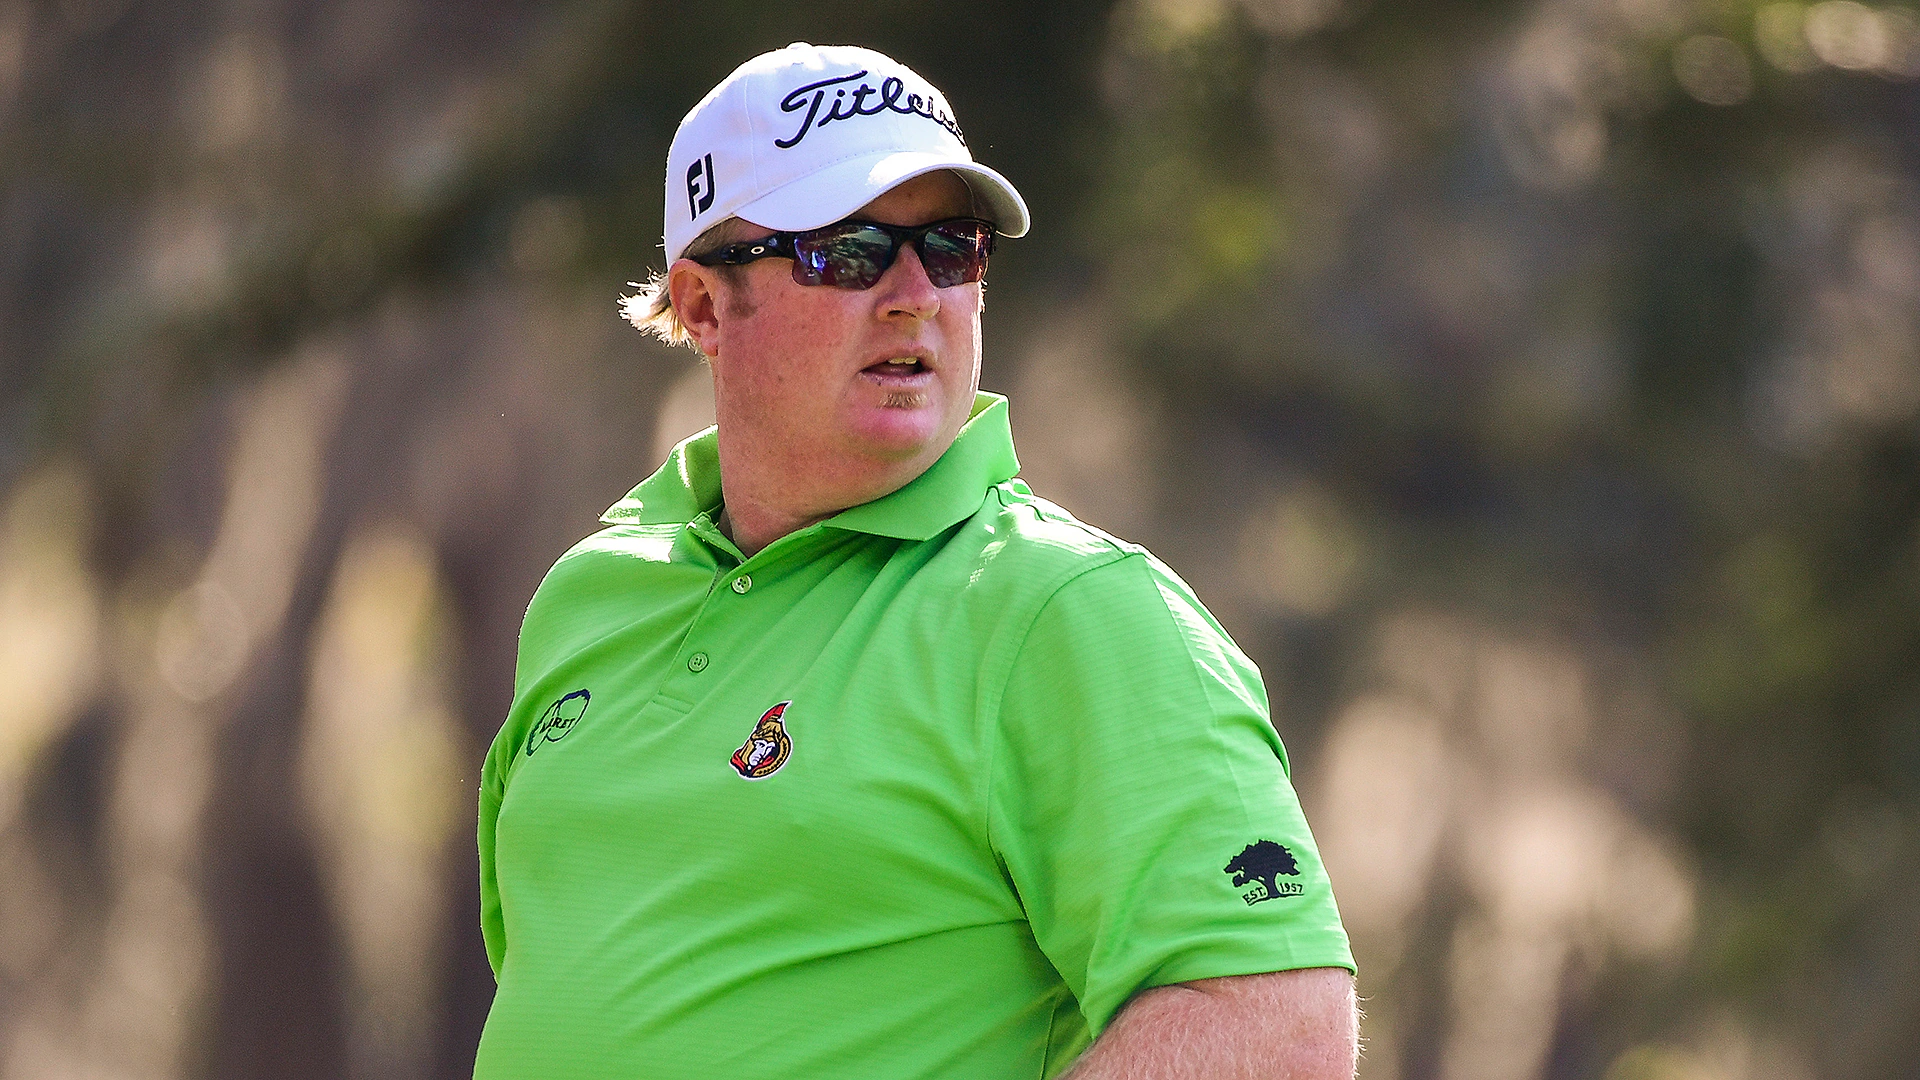 Fritsch suspended after self-reporting drug violation